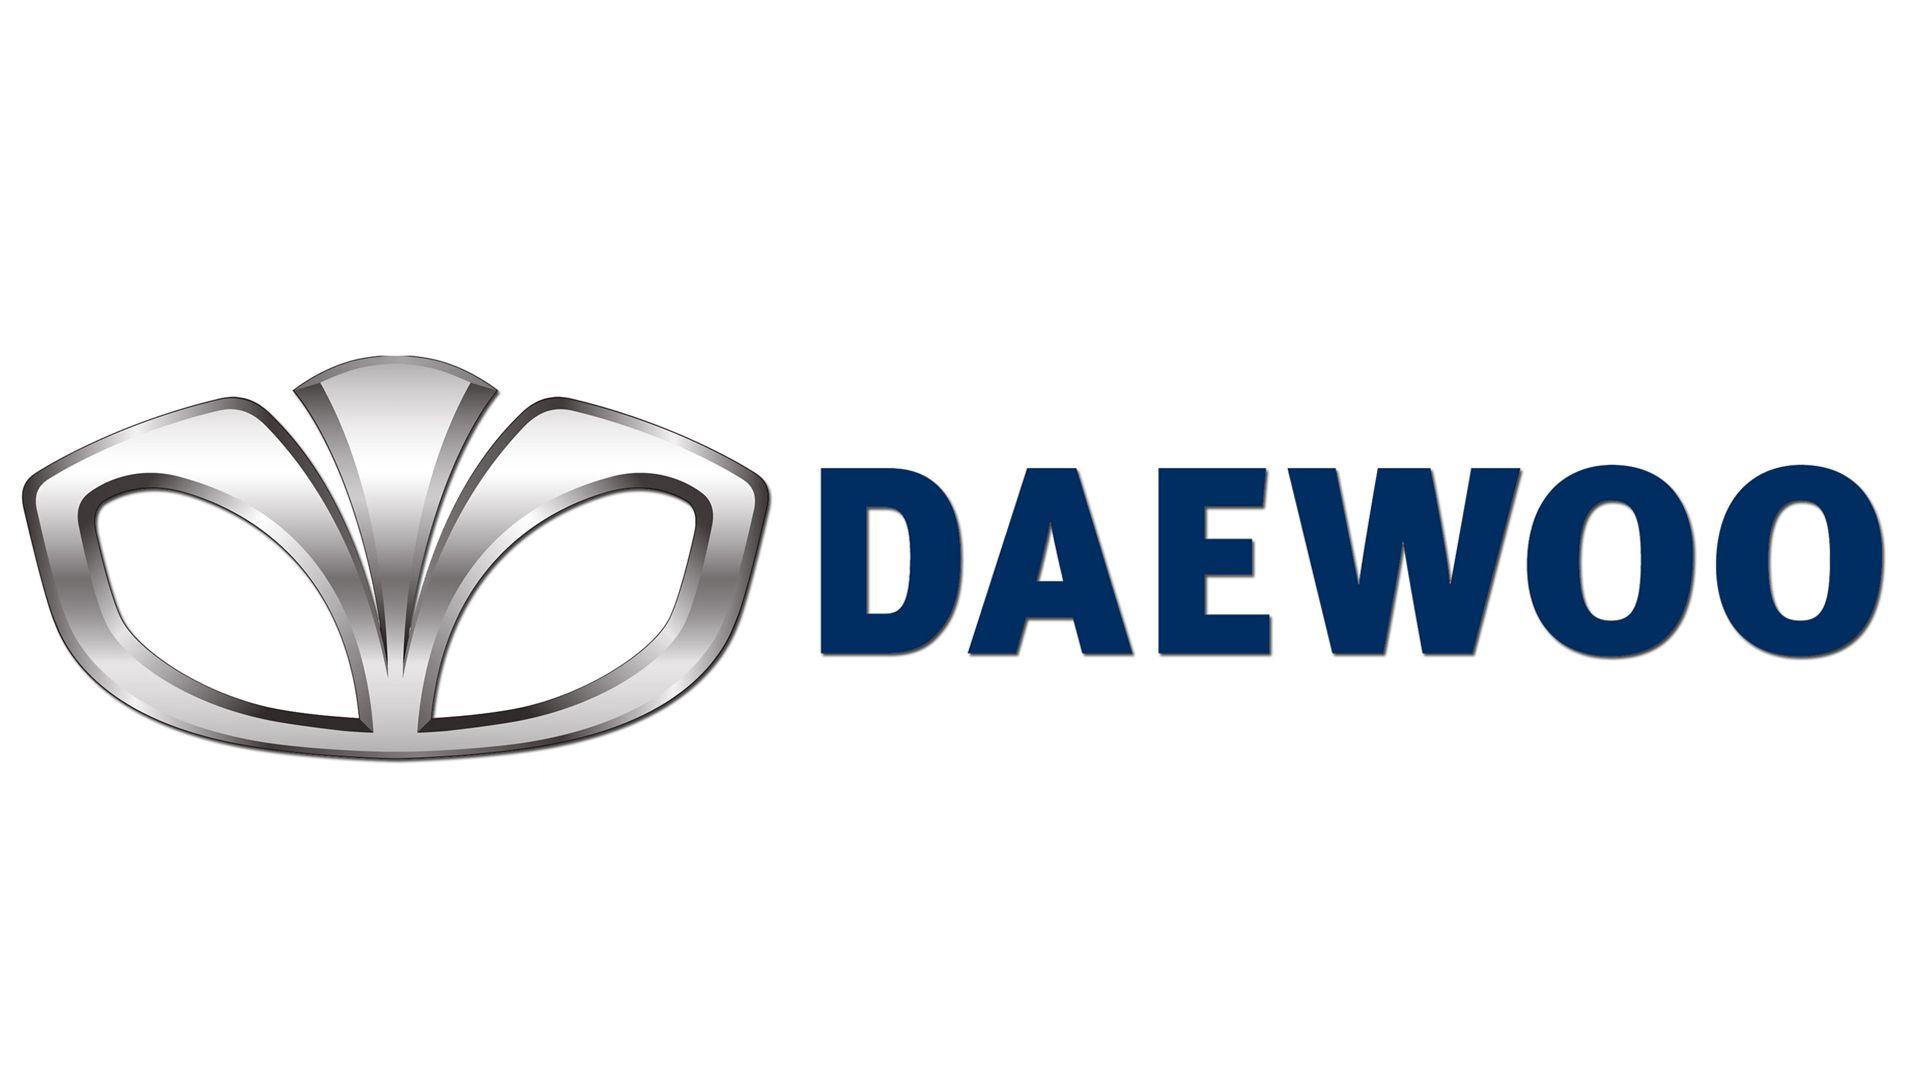 Daewoo Logo - Daewoo Logo Meaning and History, latest models | World Cars Brands